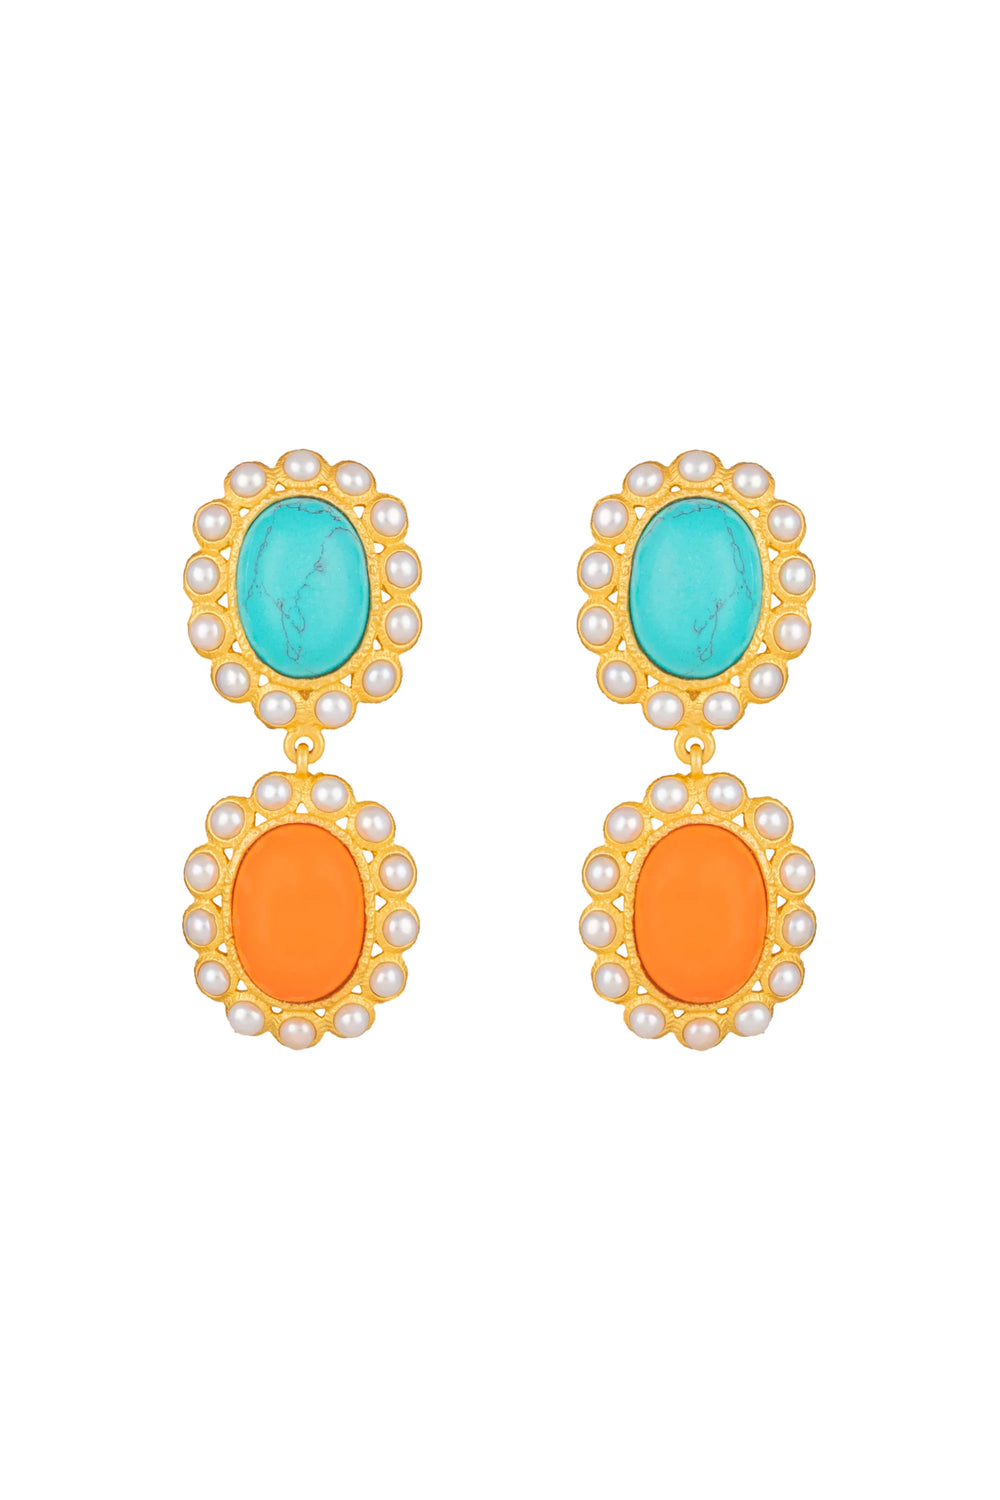 Ada Earrings Orange Coral and Turquoise